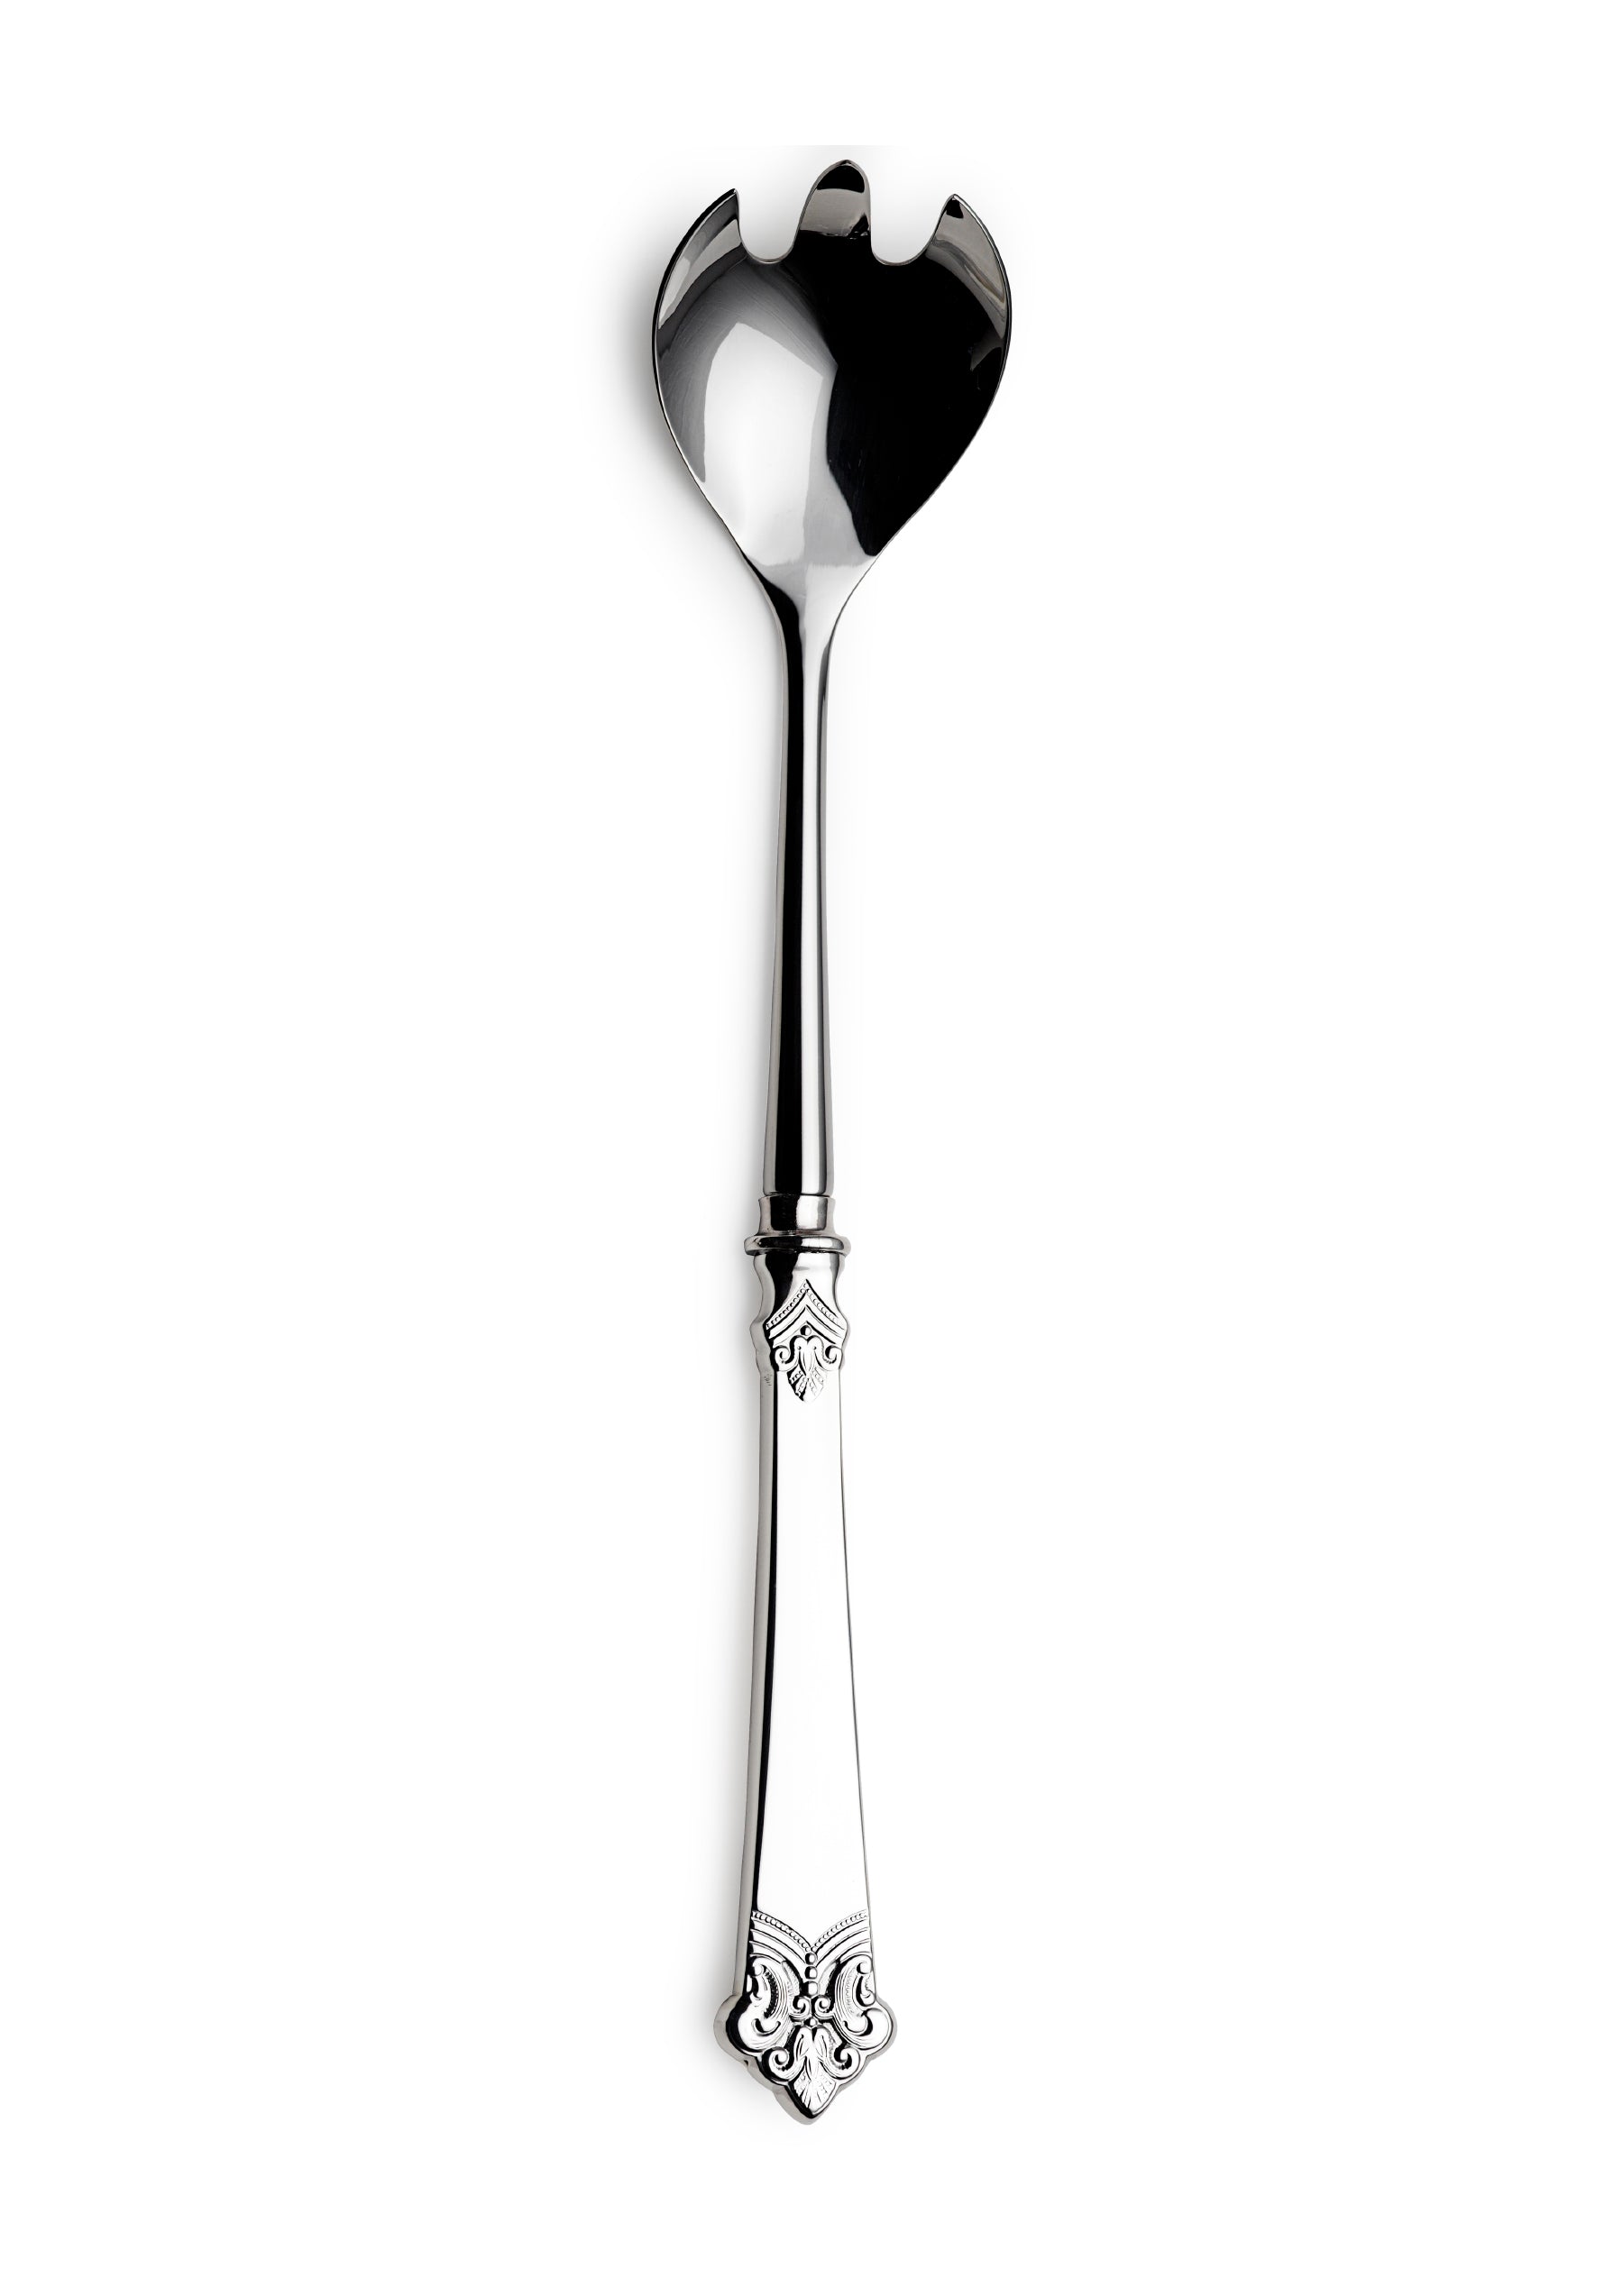 Anitra salad fork with steel blade